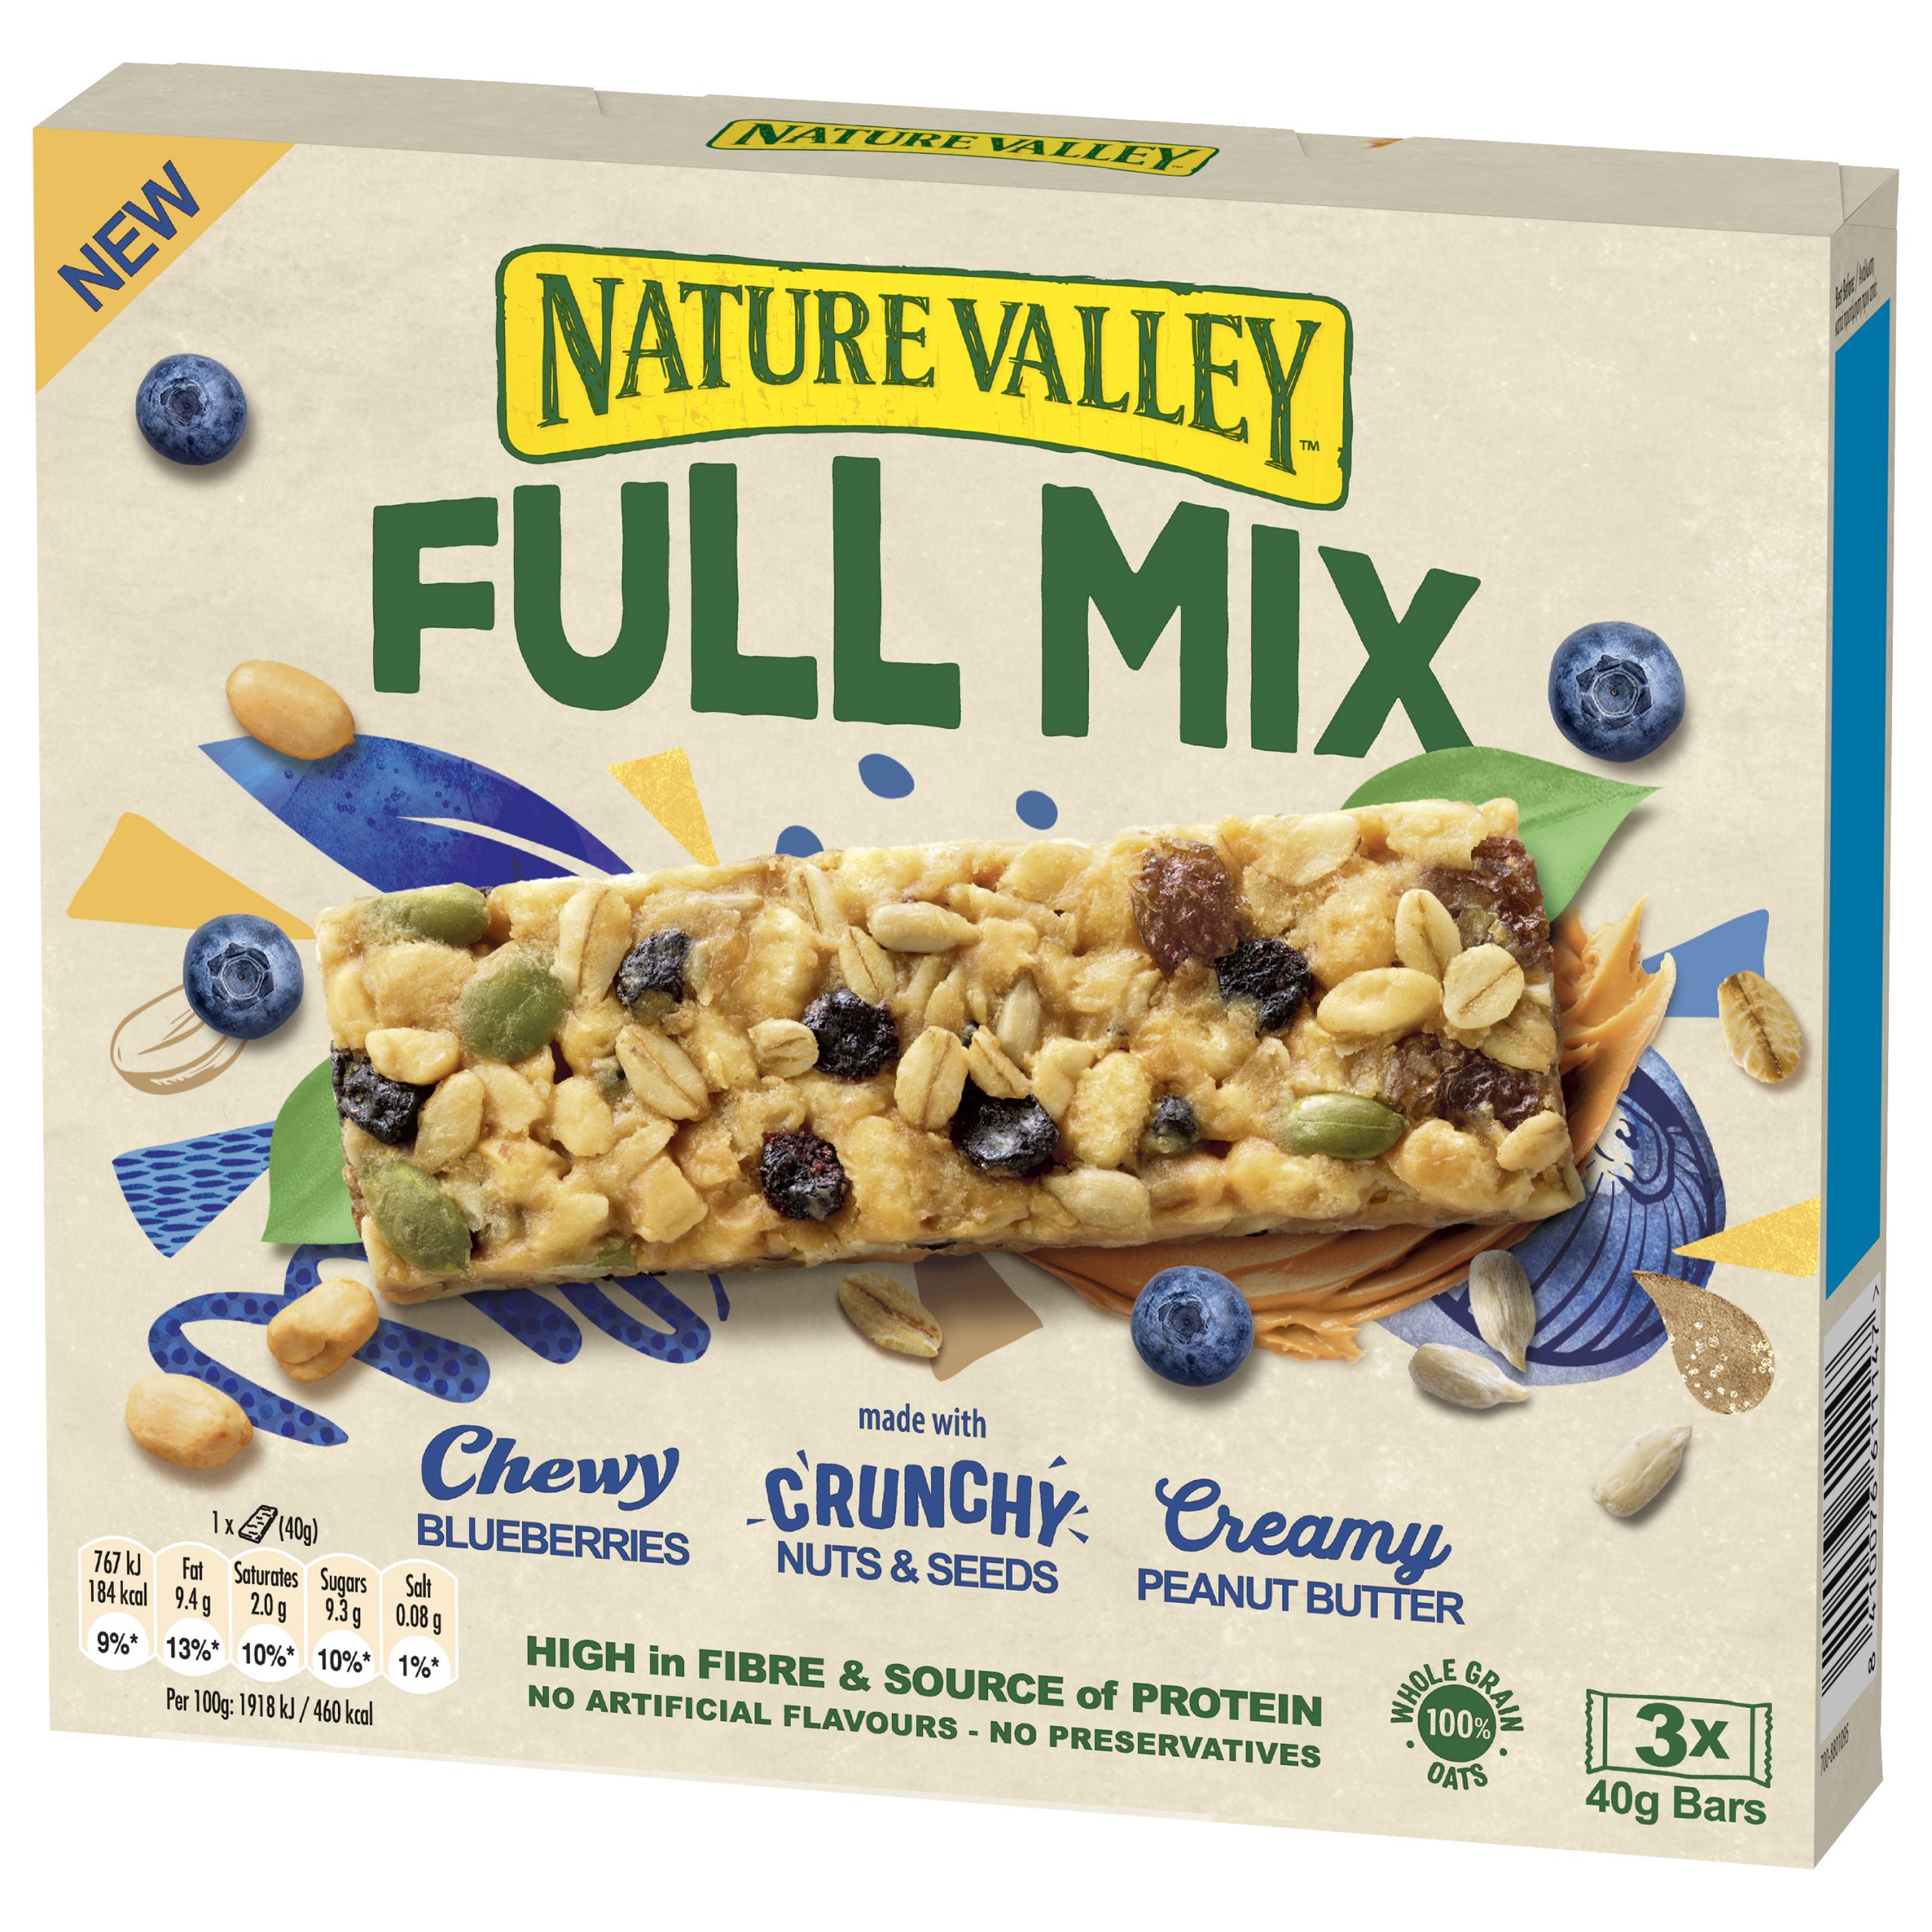 Nature Valley brings full mix bars to the UK